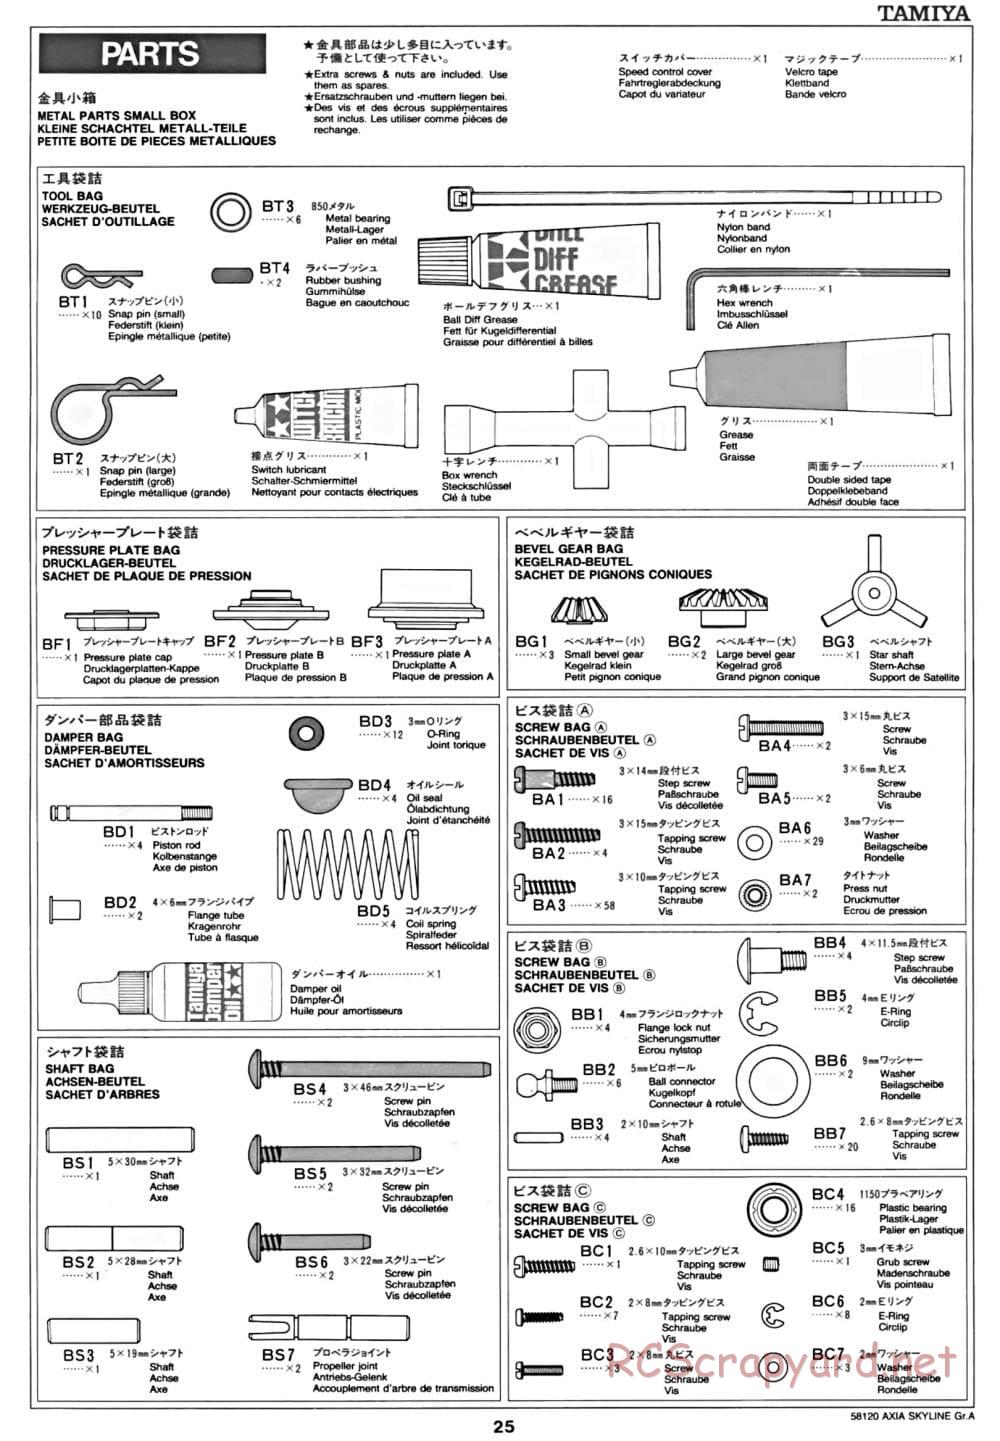 Tamiya - Axia Skyline GT-R Gr.A - TA-01 Chassis - Manual - Page 26